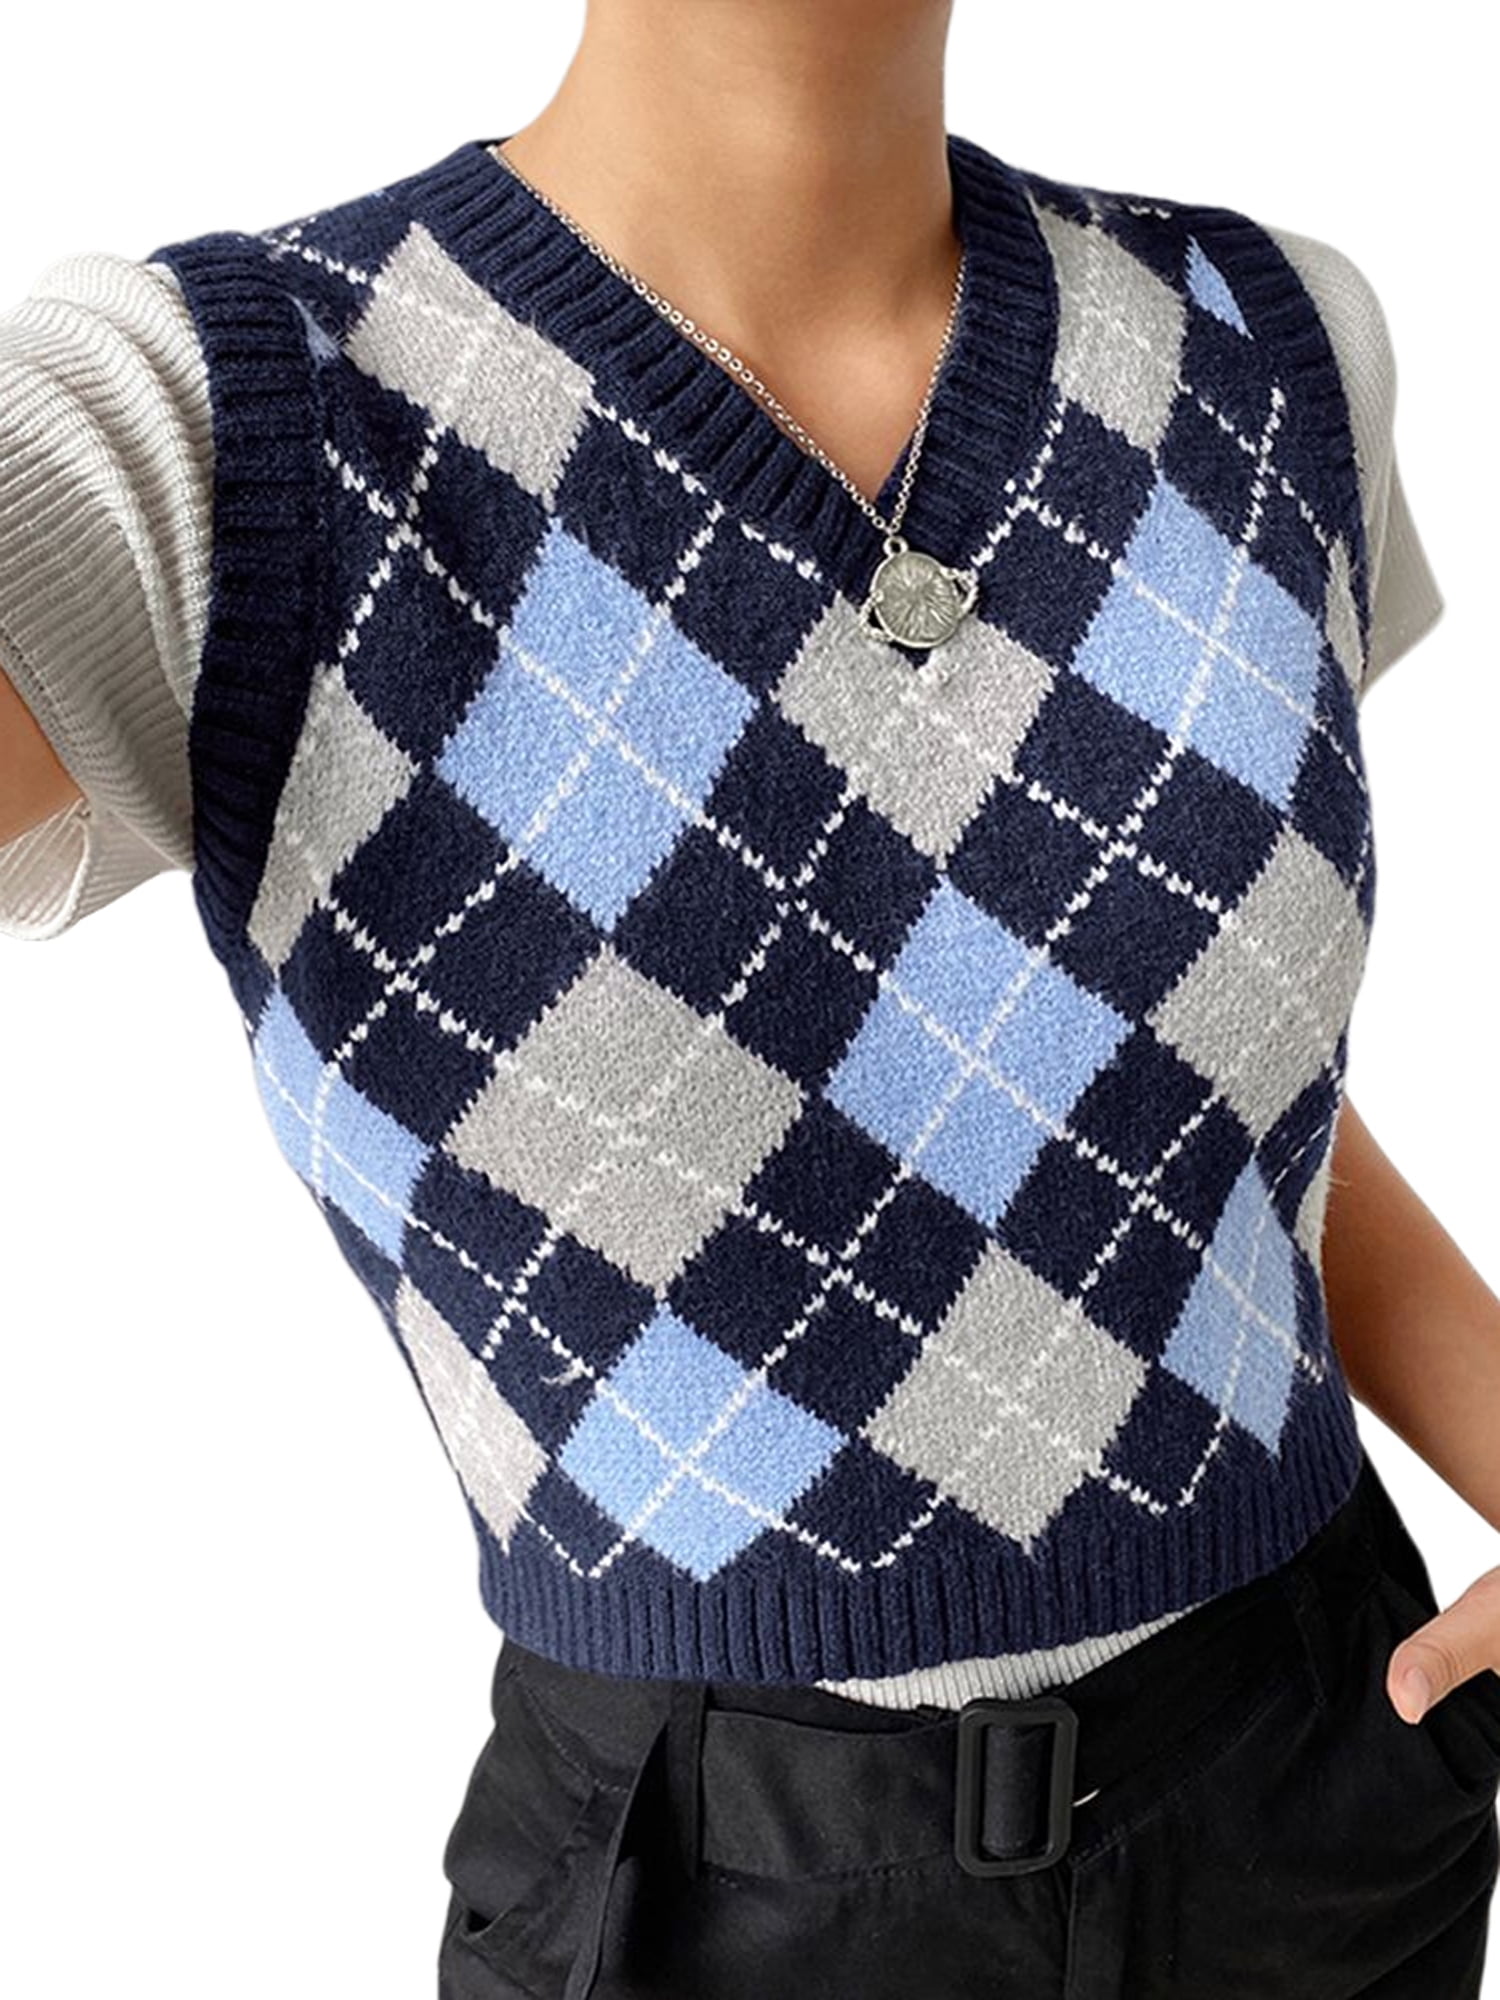 Plaid Knitted Sweater Vest Female Streetwear Preppy Style Vintage Striped Clothes V Neck Tank Top Y2K Knitwear